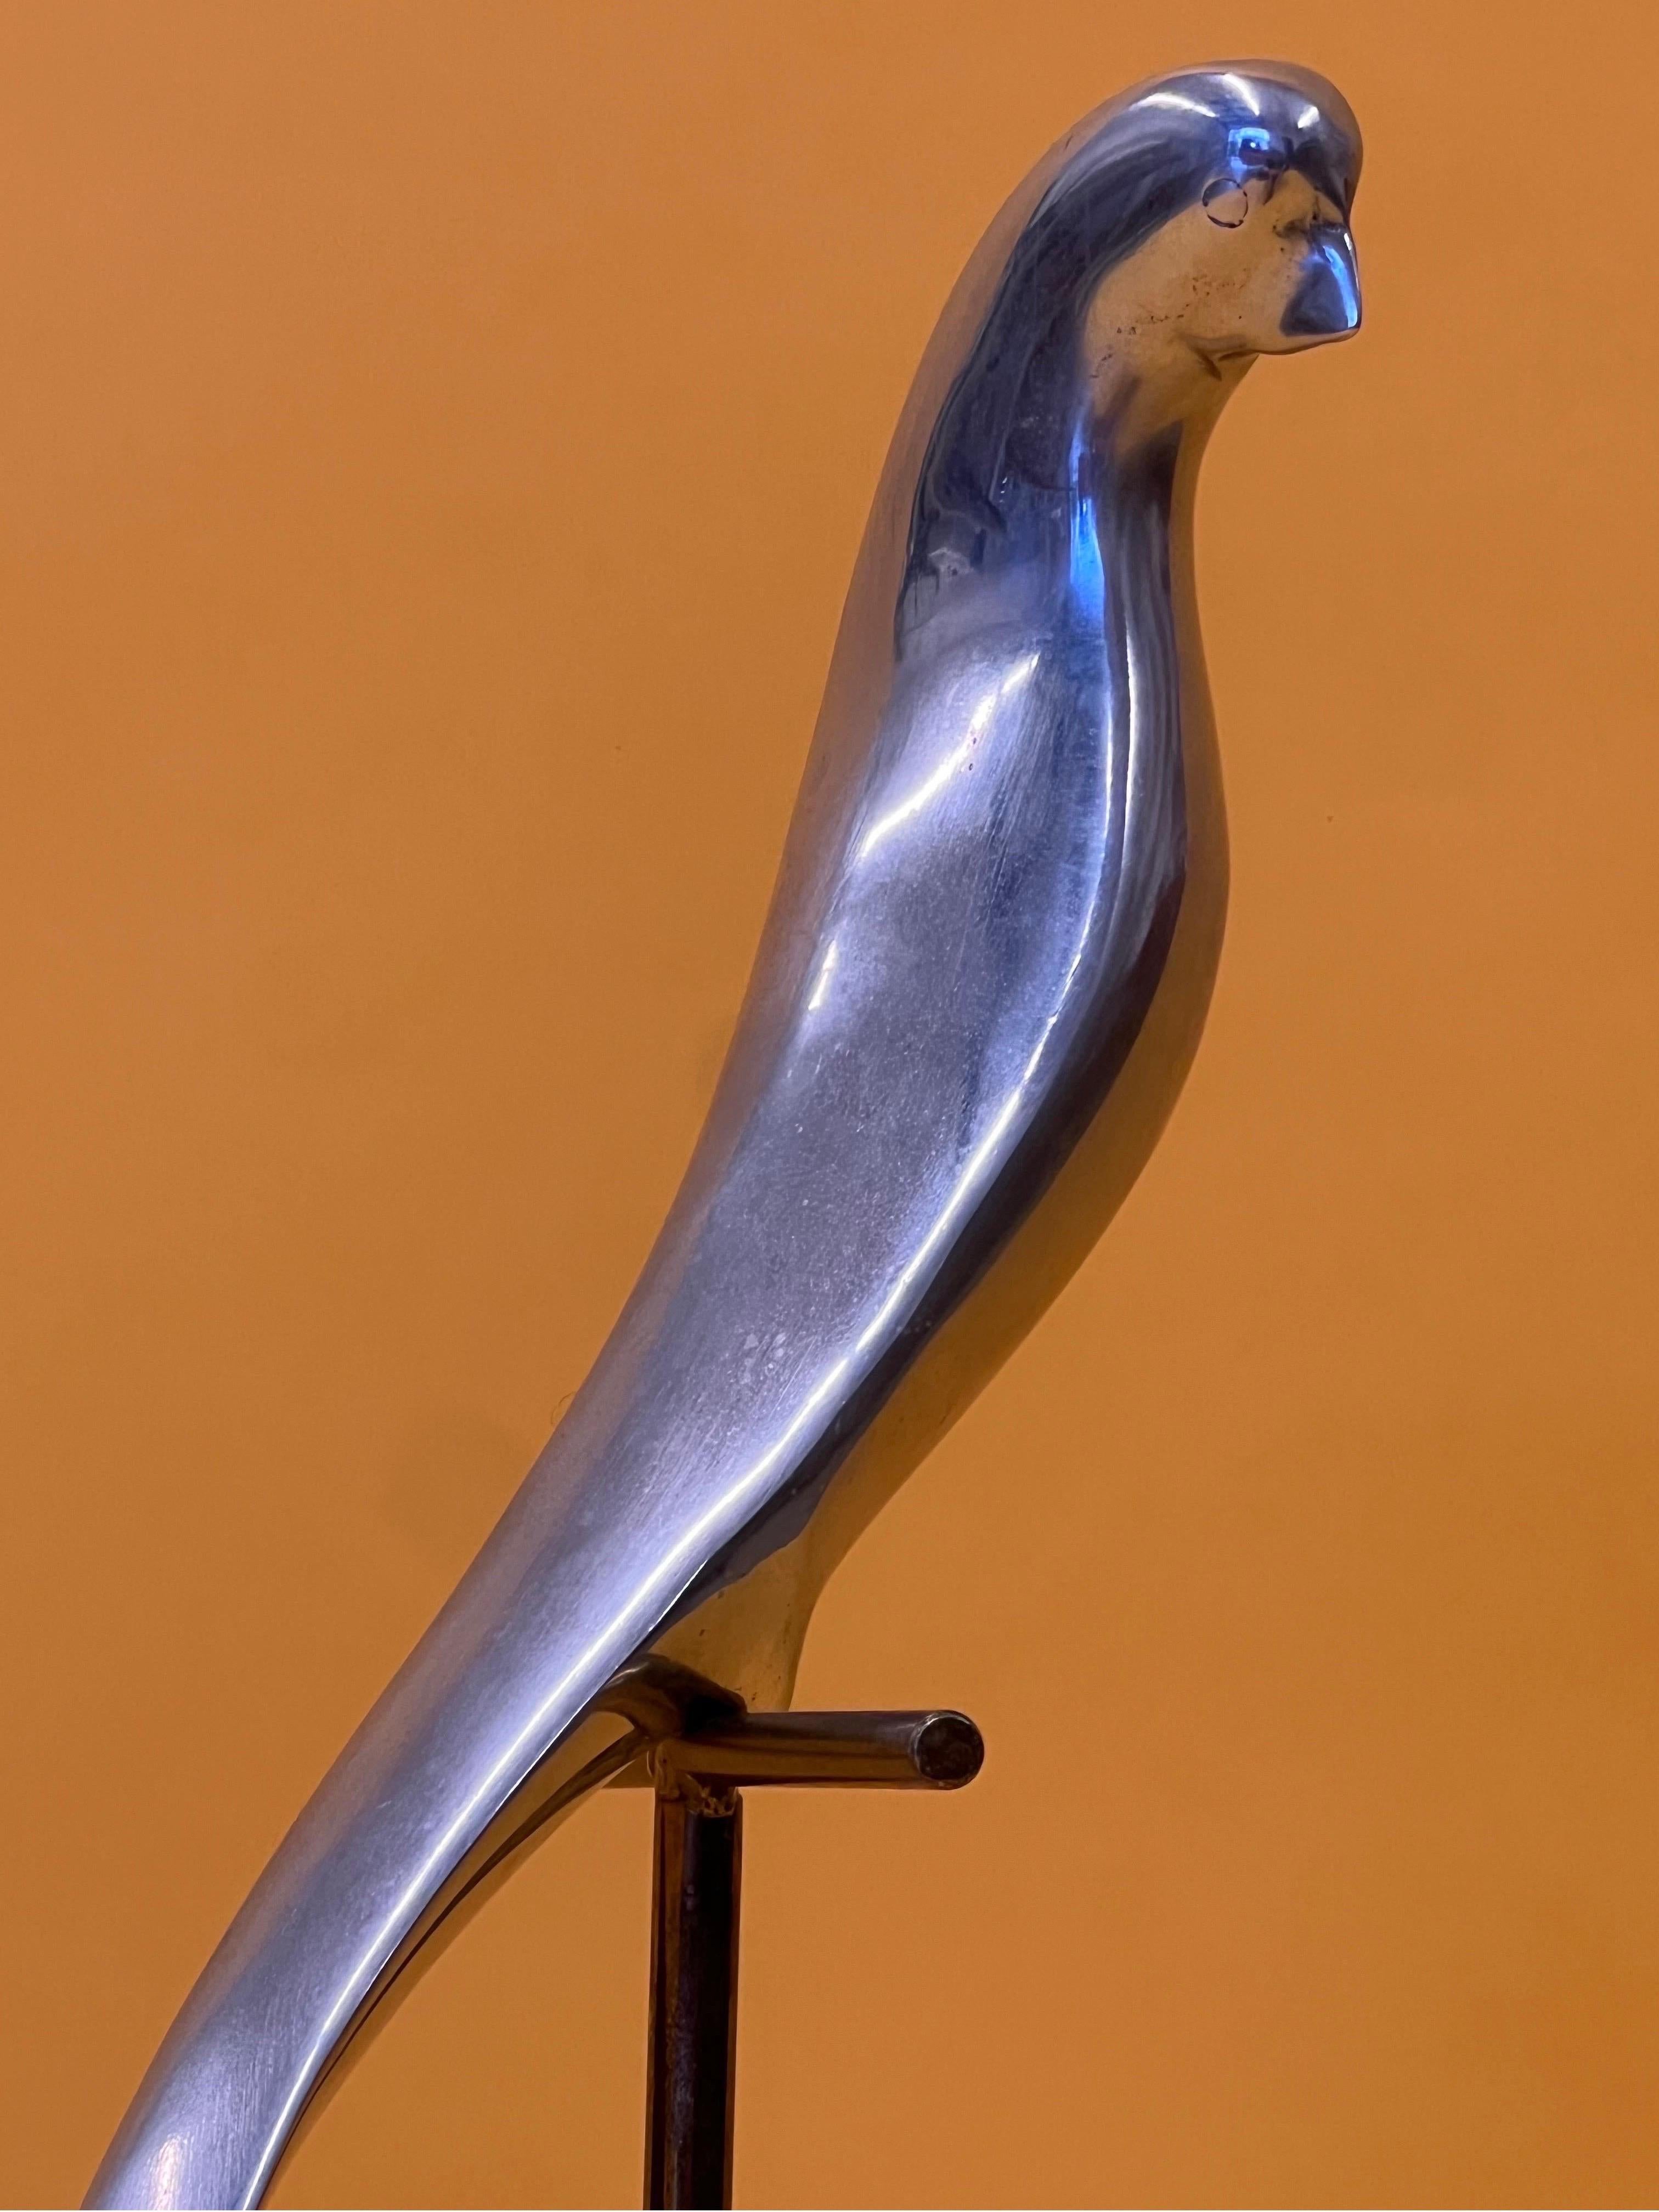 1980s sculpture made by C. Jere with faint signature still present. Aluminum parrot sits atop golden perch. The square base is made from marble with a gold plate. The perch with parrot does swivel for multiple staging positions and angles. In great